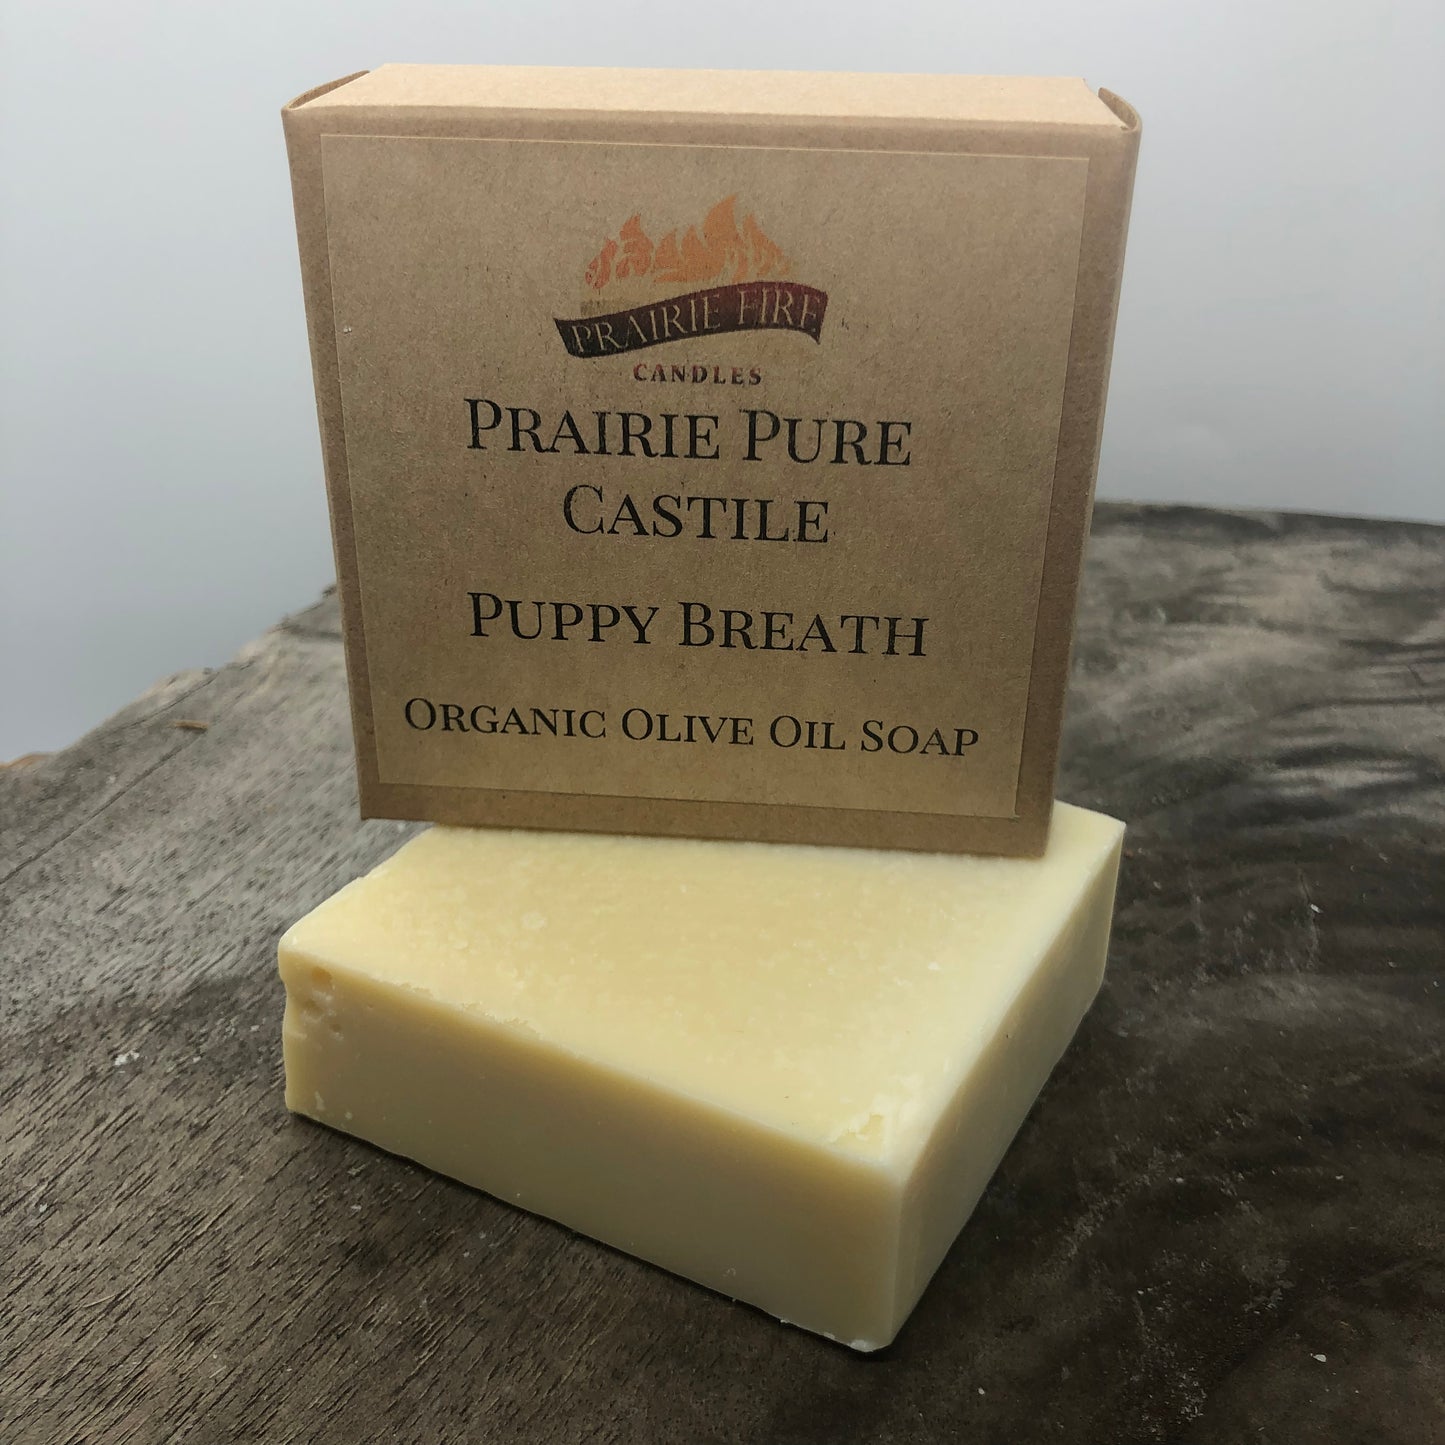 Prairie Sage Real Castile Organic Olive Oil Soap for Sensitive Skin - Dye Free - 100% Certified Organic Extra Virgin Olive Oil - Prairie Fire Candles